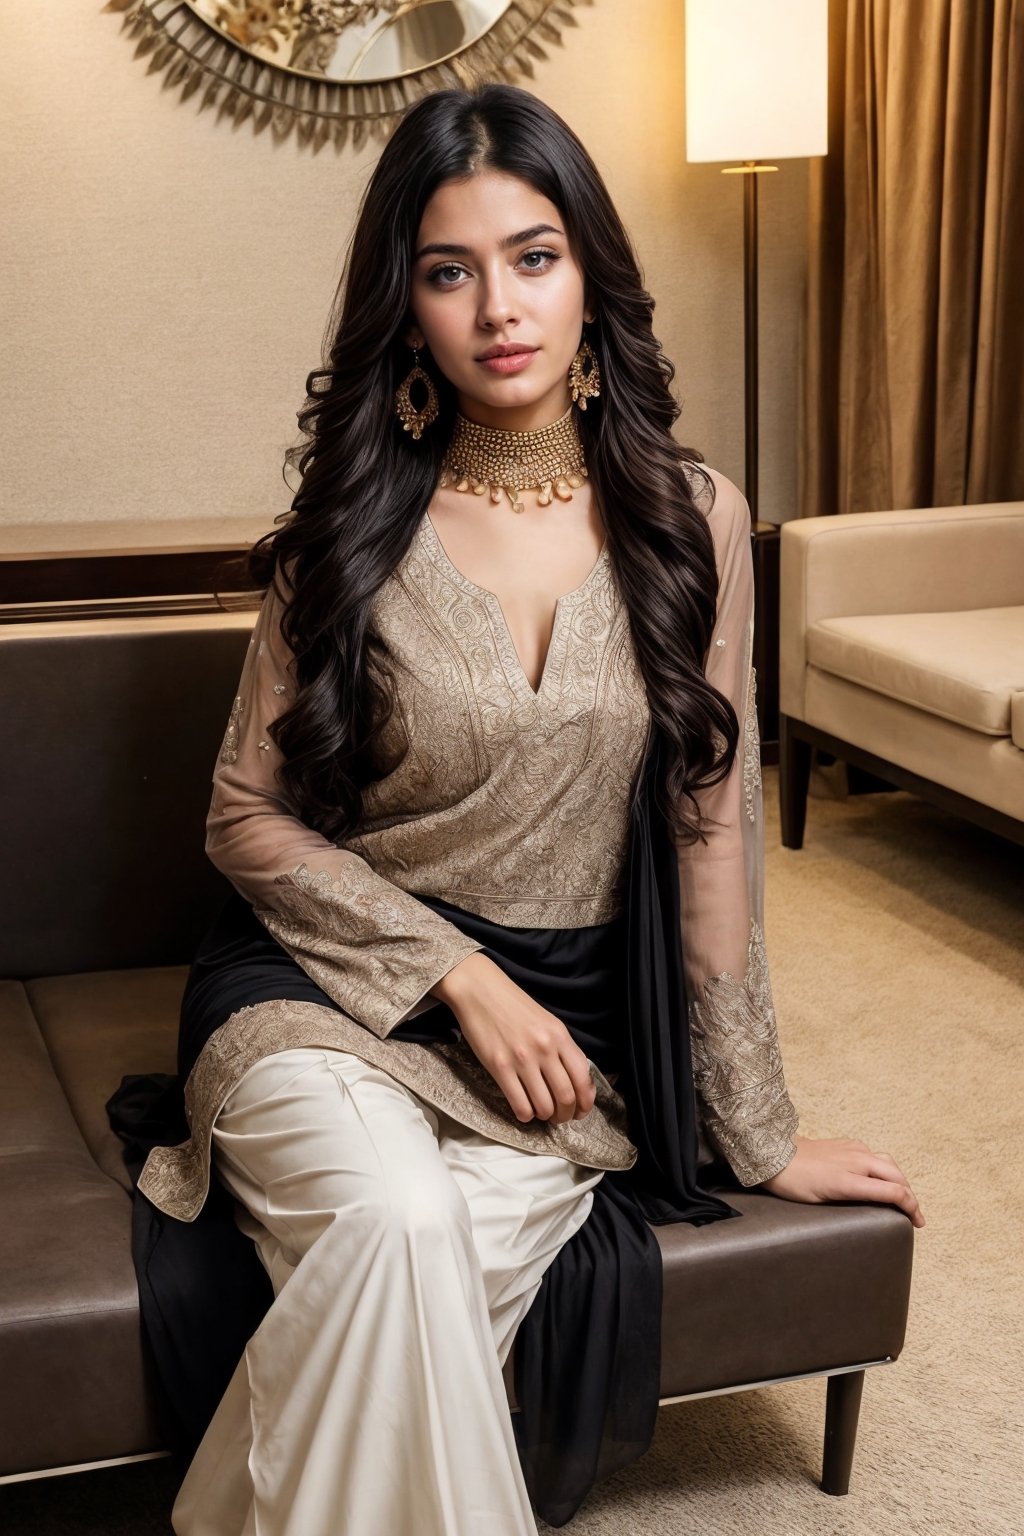 beautiful cute young attractive girl indian, teenage girl, village girl,18 year old,cute, instagram model,long black hair . Imagine a Pakistani woman wearing a stunning white shalwar kameez, reclining gracefully in a lavish hotel lobby, her confidence evident in her posture, her chest subtly accentuated, adorned with intricate jewelry and elegant earrings, 3D rendering, focusing on lifelike textures and lighting effects, --ar 16:9 --v 5